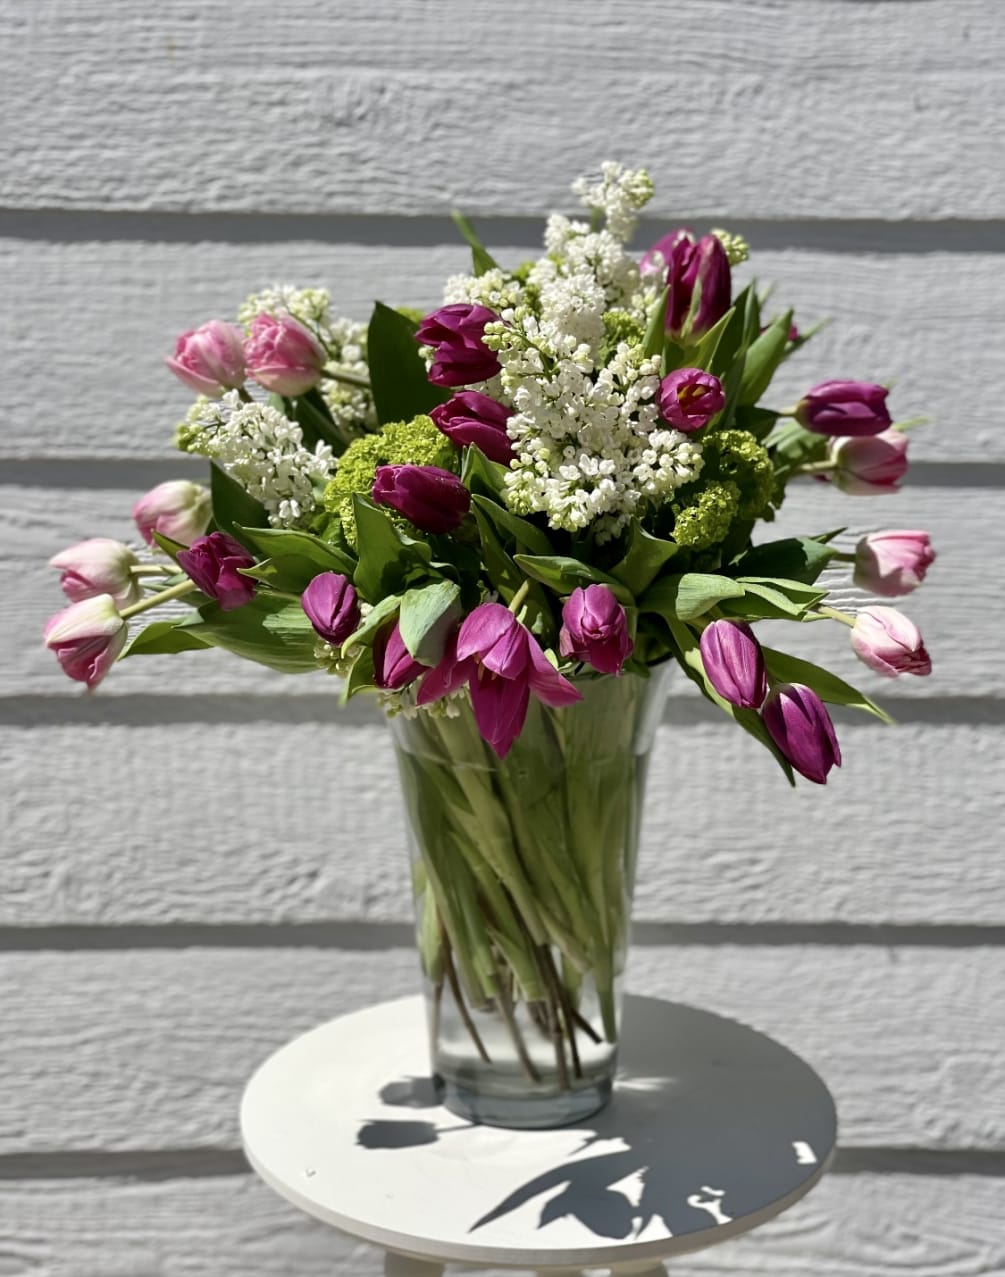 This incredibly stunning tulip design is loaded with 40 stems of tulips